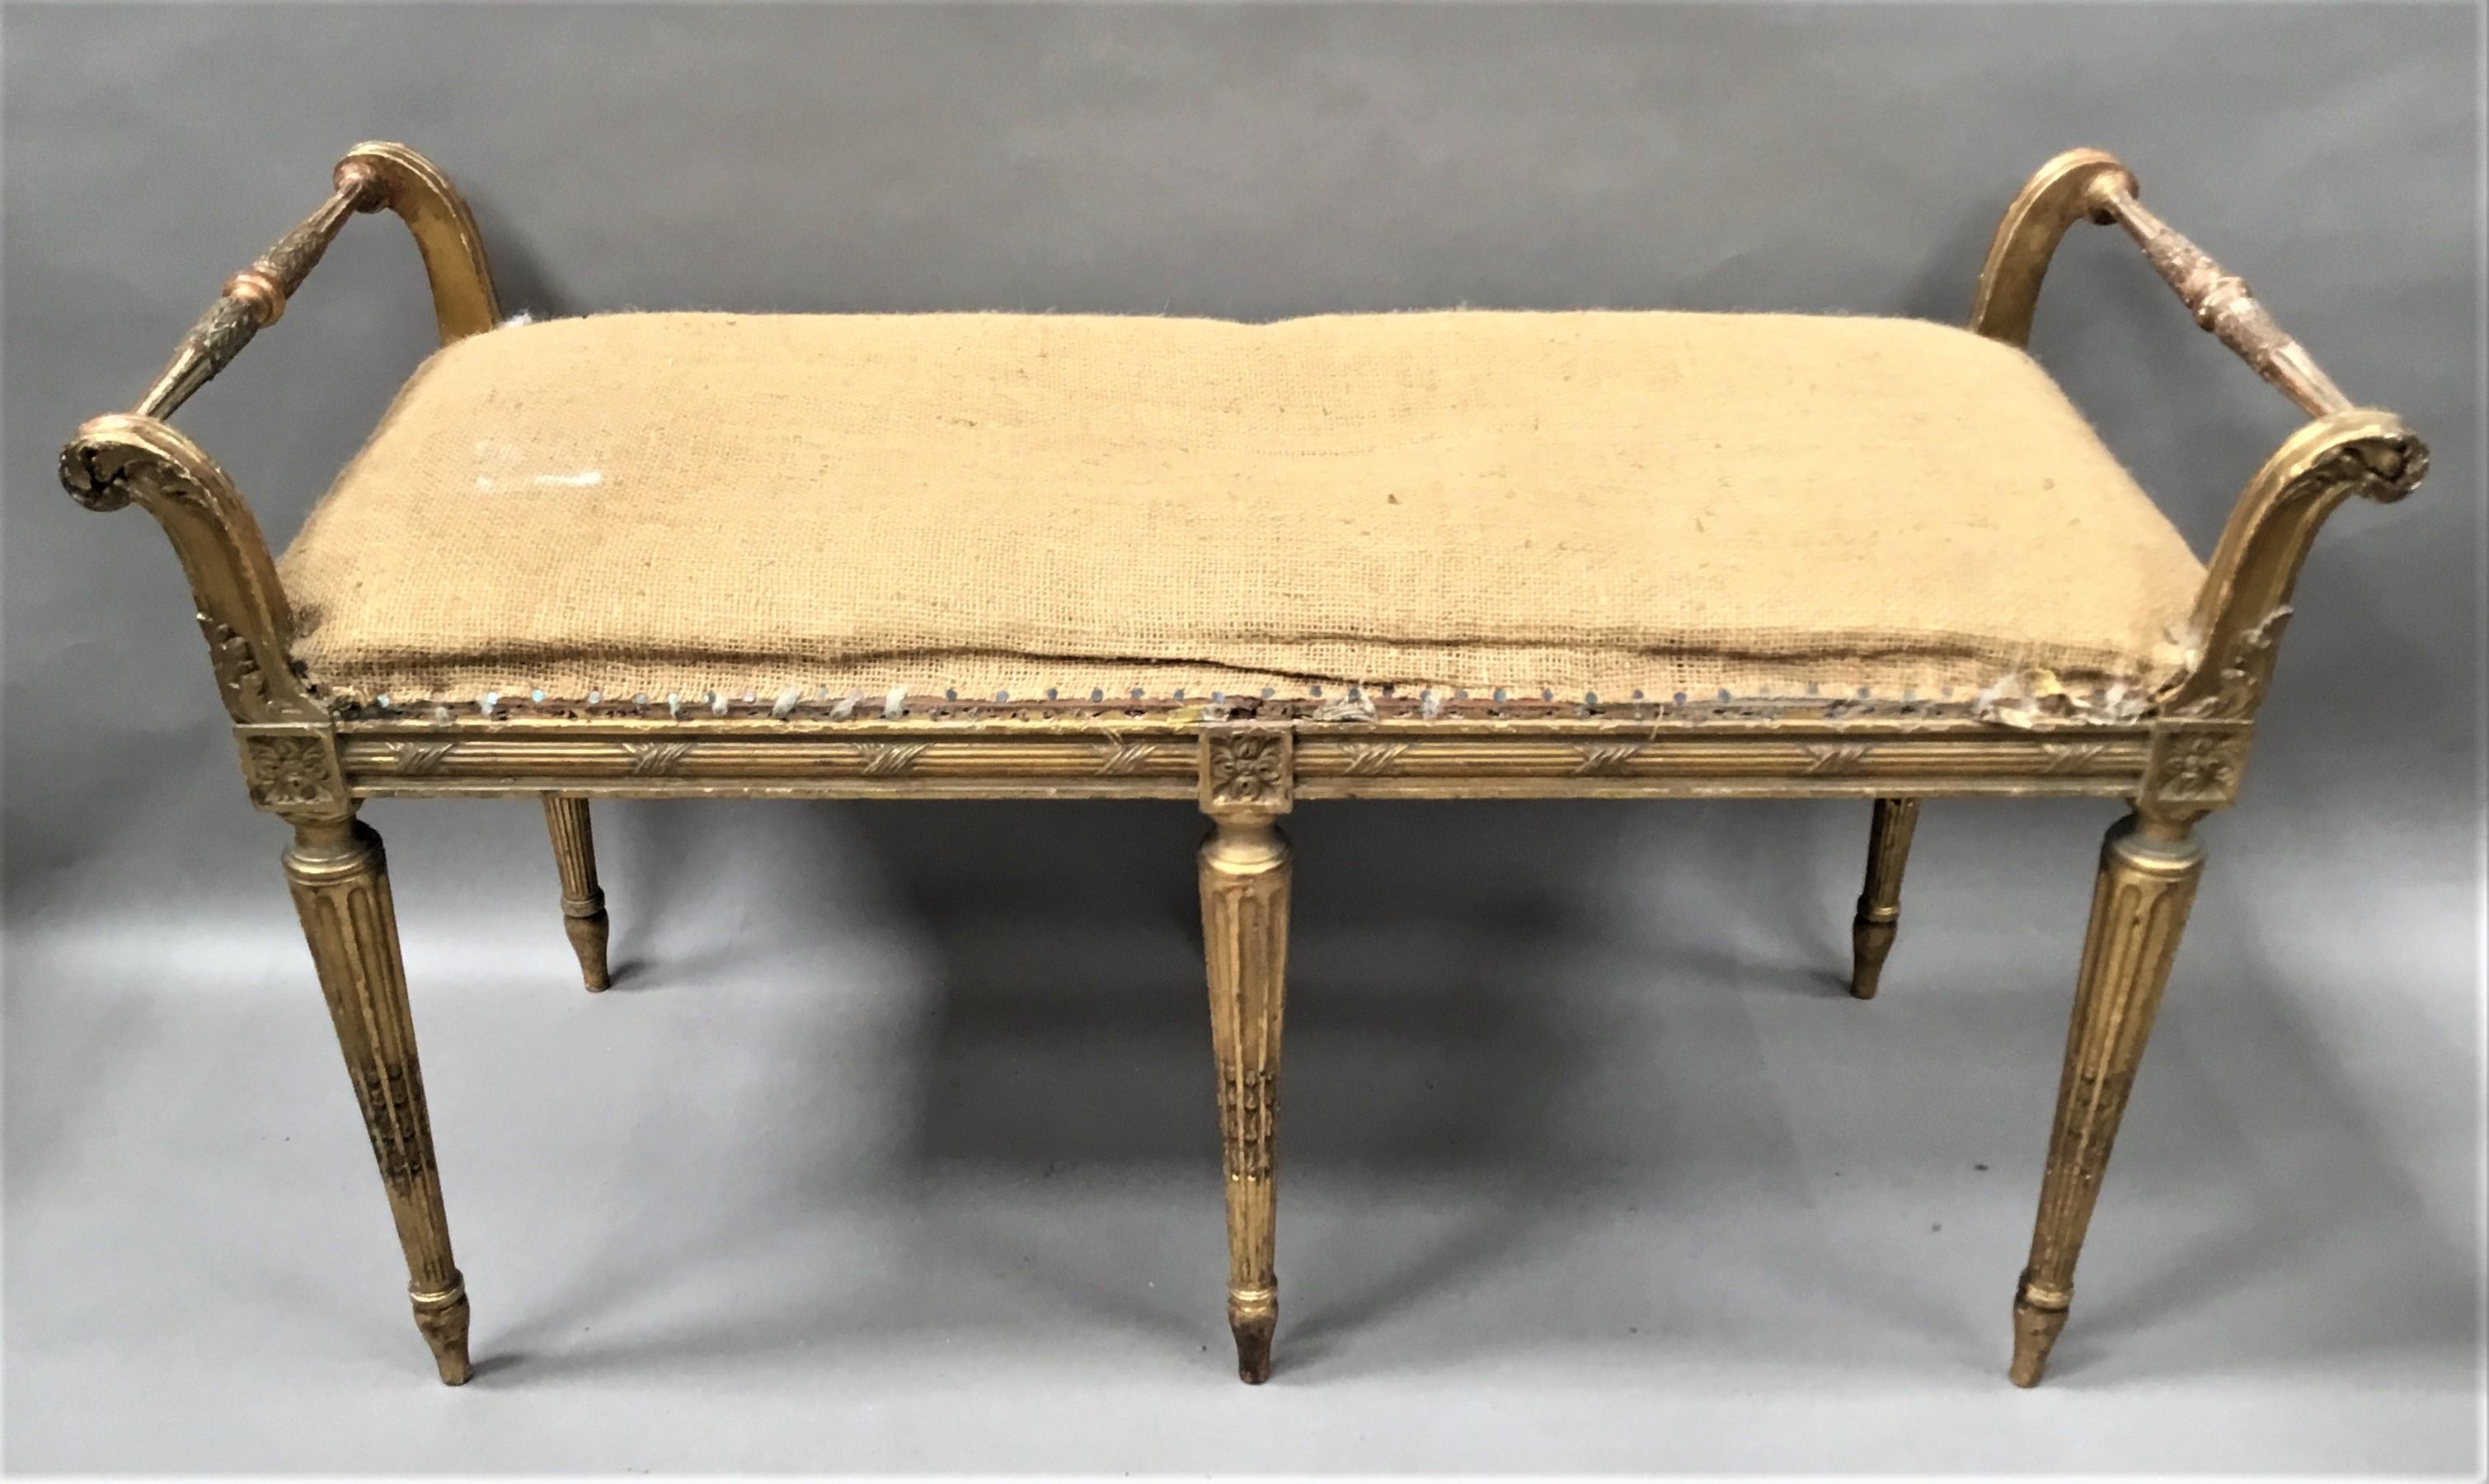 19th century giltwood window seat / stool in the neoclassical manner, finely carved with crisp detail and original gilding; the slender turned end hand rails with acanthus carving and fluted decoration raised on scrolled supports with acanthus leaf